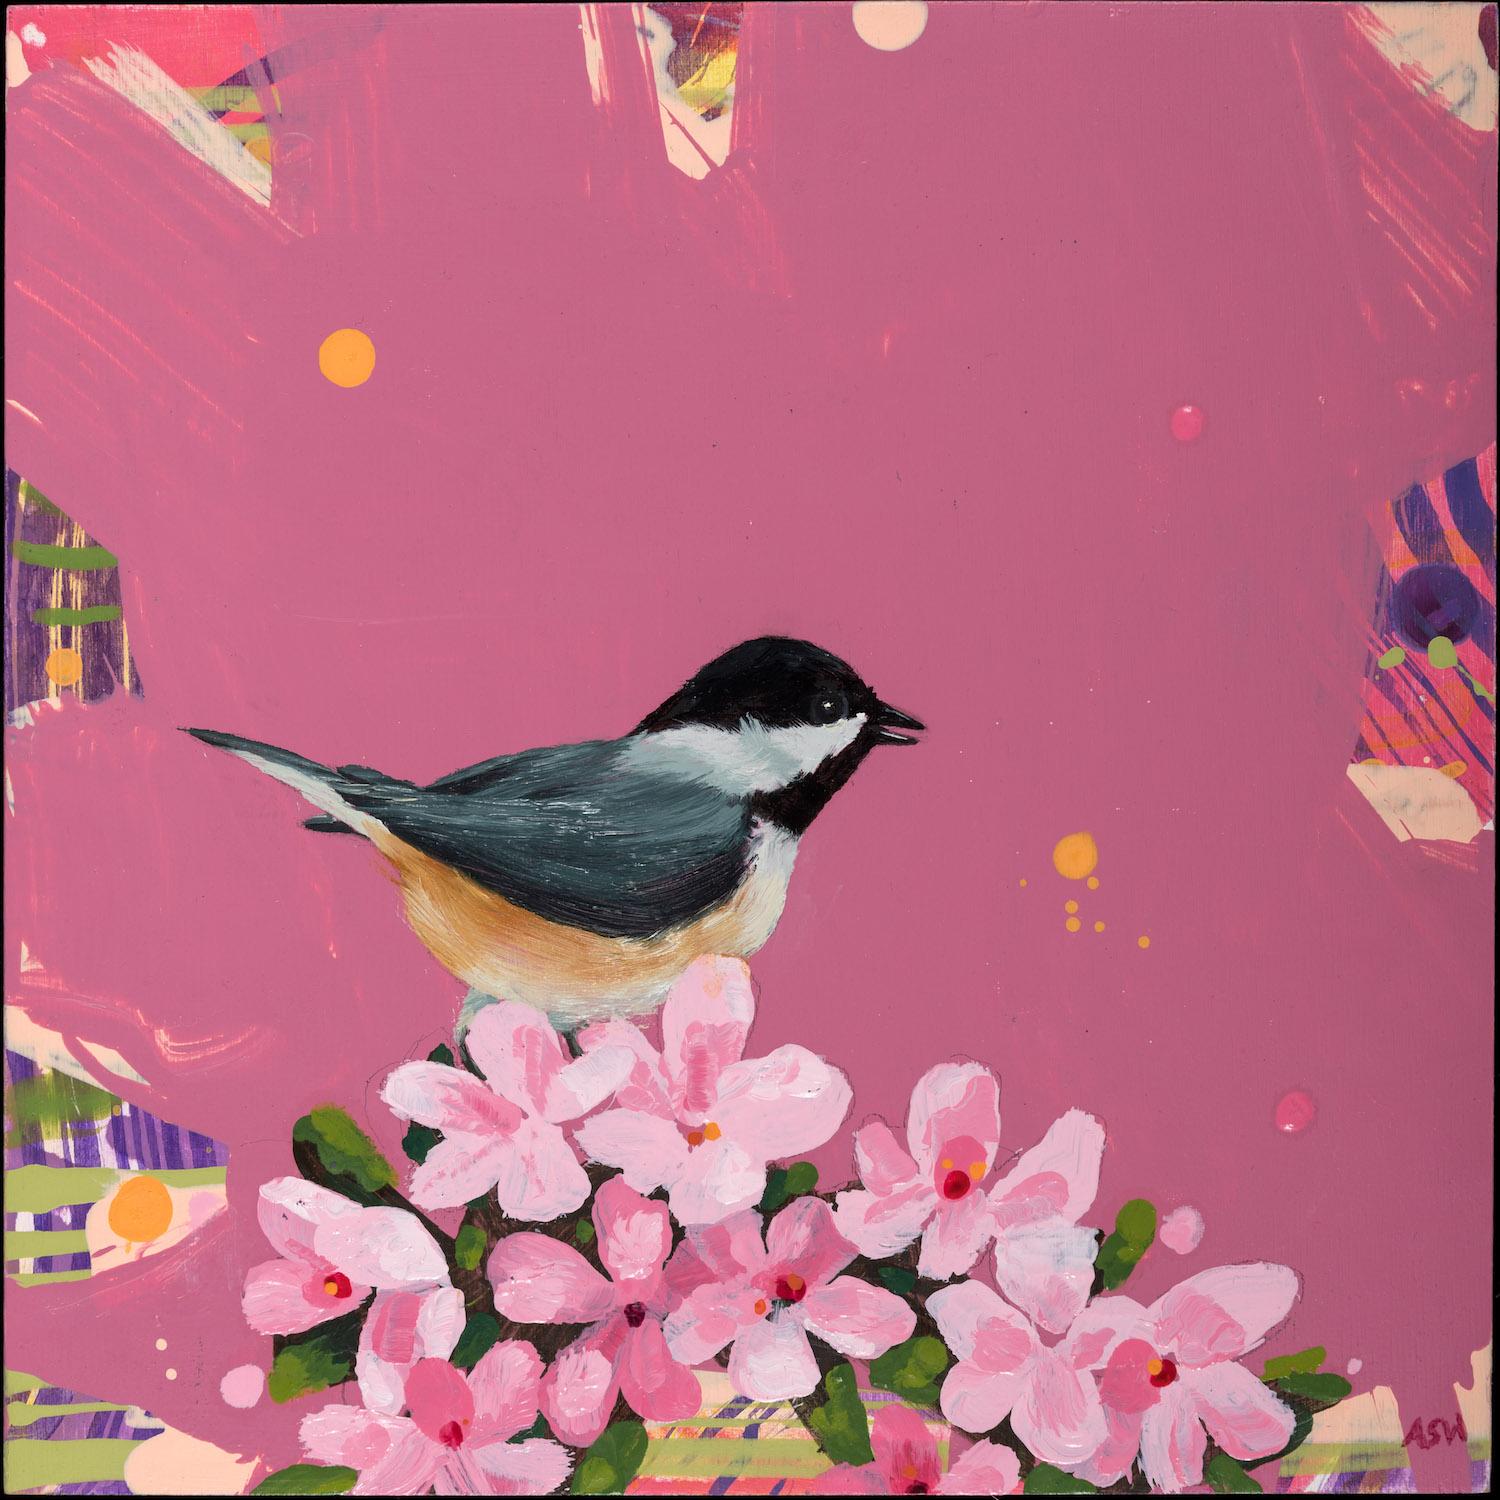 Anne Sargent Walker's Chickadee-dee-dee is a brightly colored 8 x 8 inch painting in Oil and Acrylic on wood panel. It features a Chickadee perched atop pale pink apple blossoms, with a deep pink abstracted background. It is signed in the lower